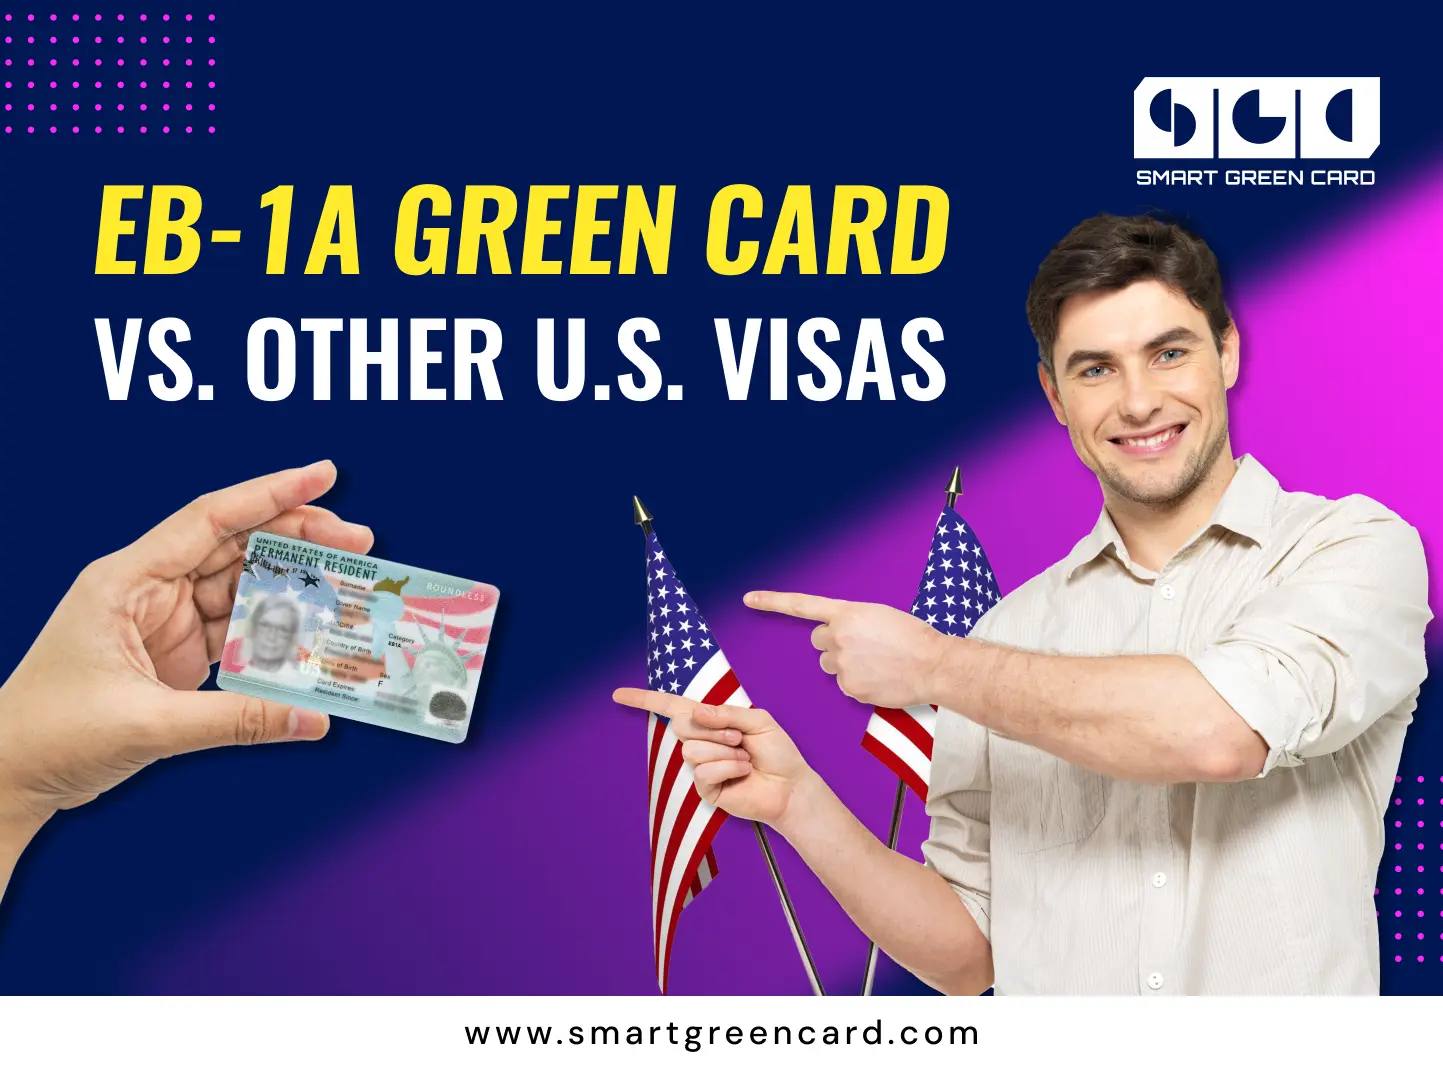 EB-1A green card vs. other US visas